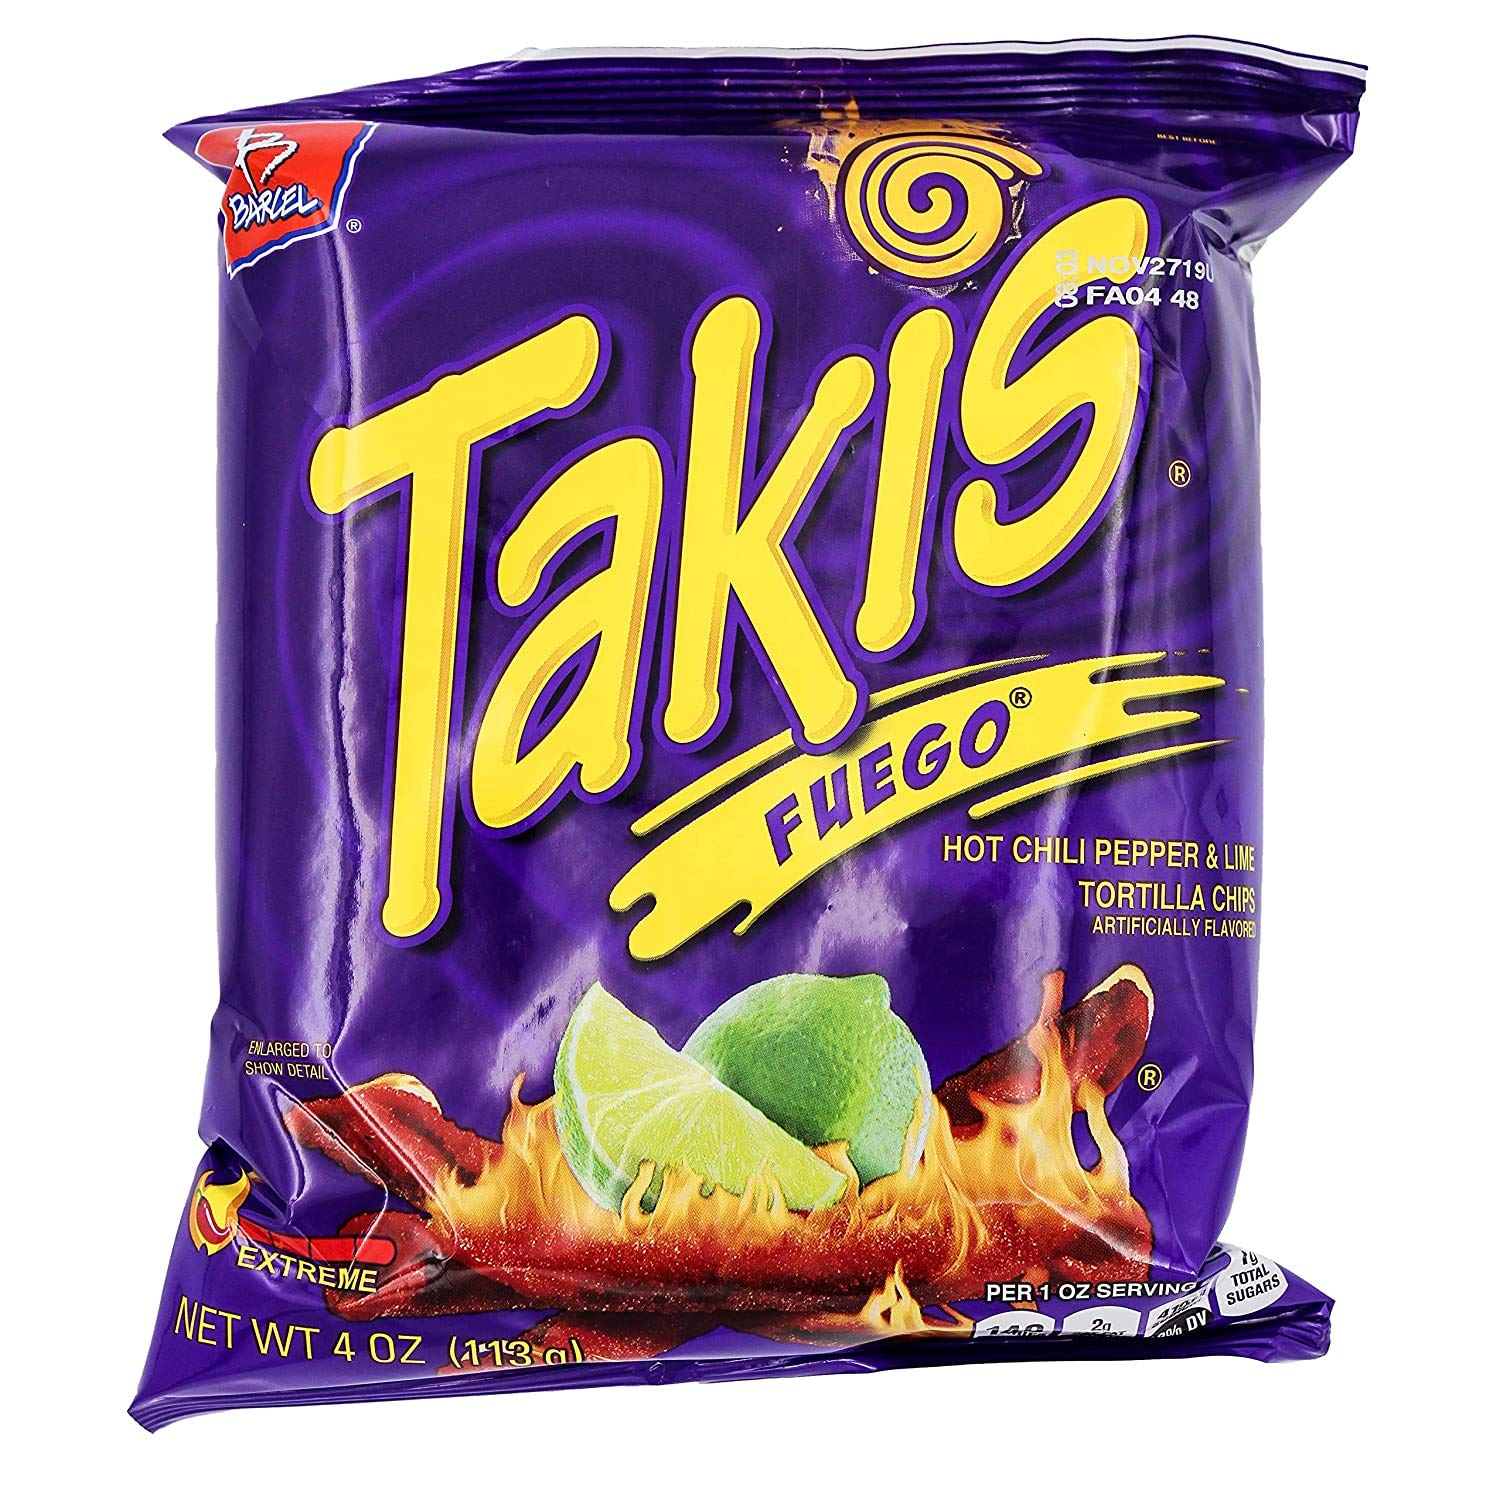 Takis Fuego 4 oz Hot Chili Pepper & Lime Flavored Rolled Tortilla Chips 1 Box ( 20 count )